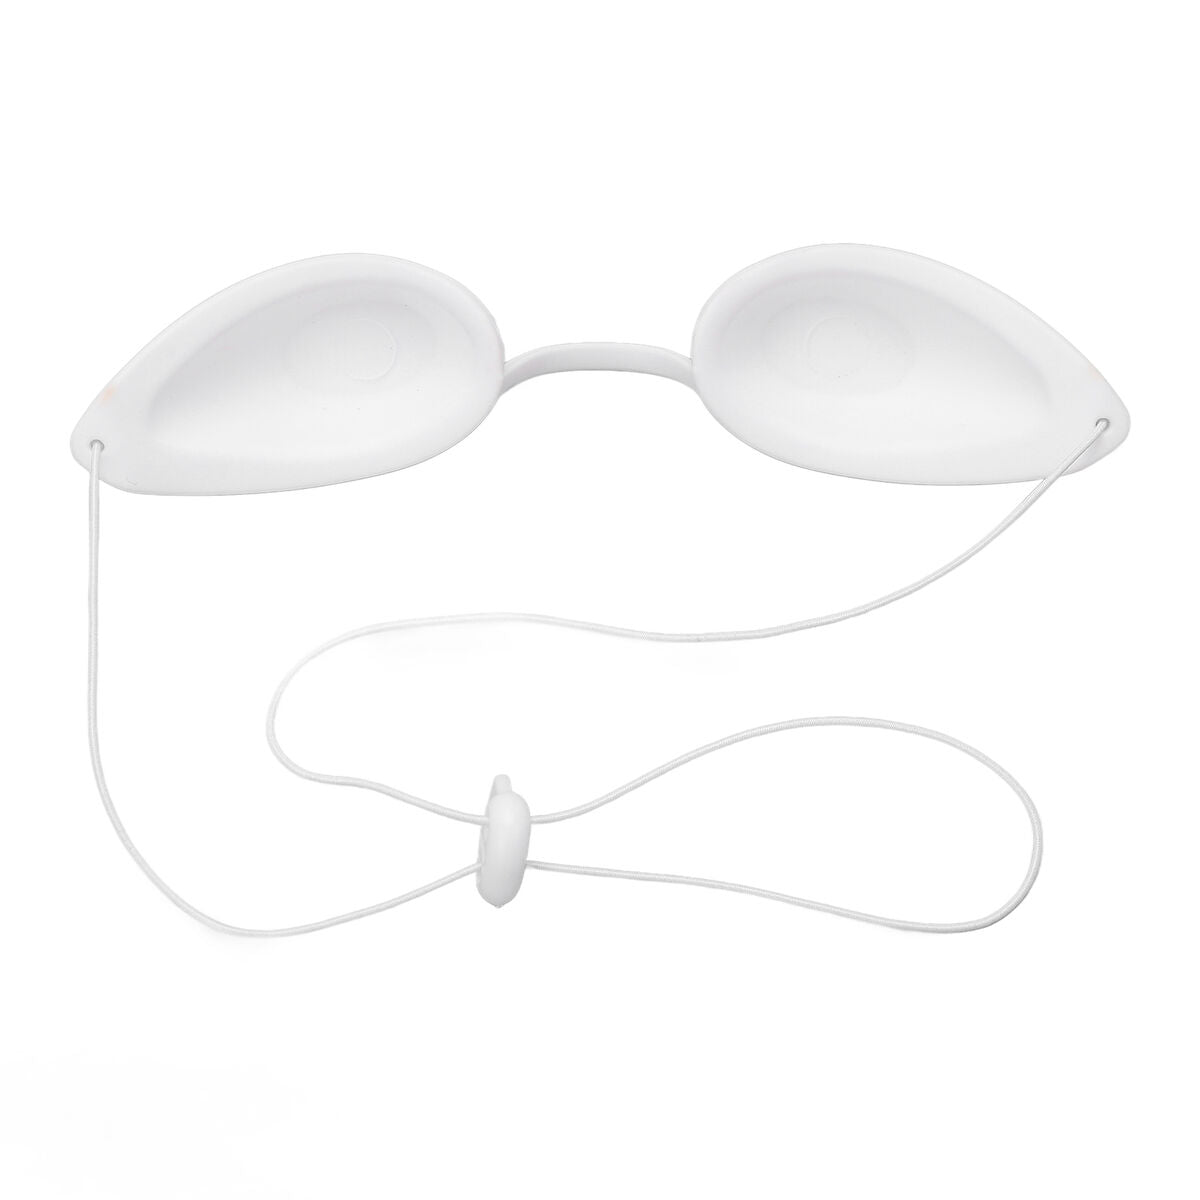 Silicone patient safety eye shields